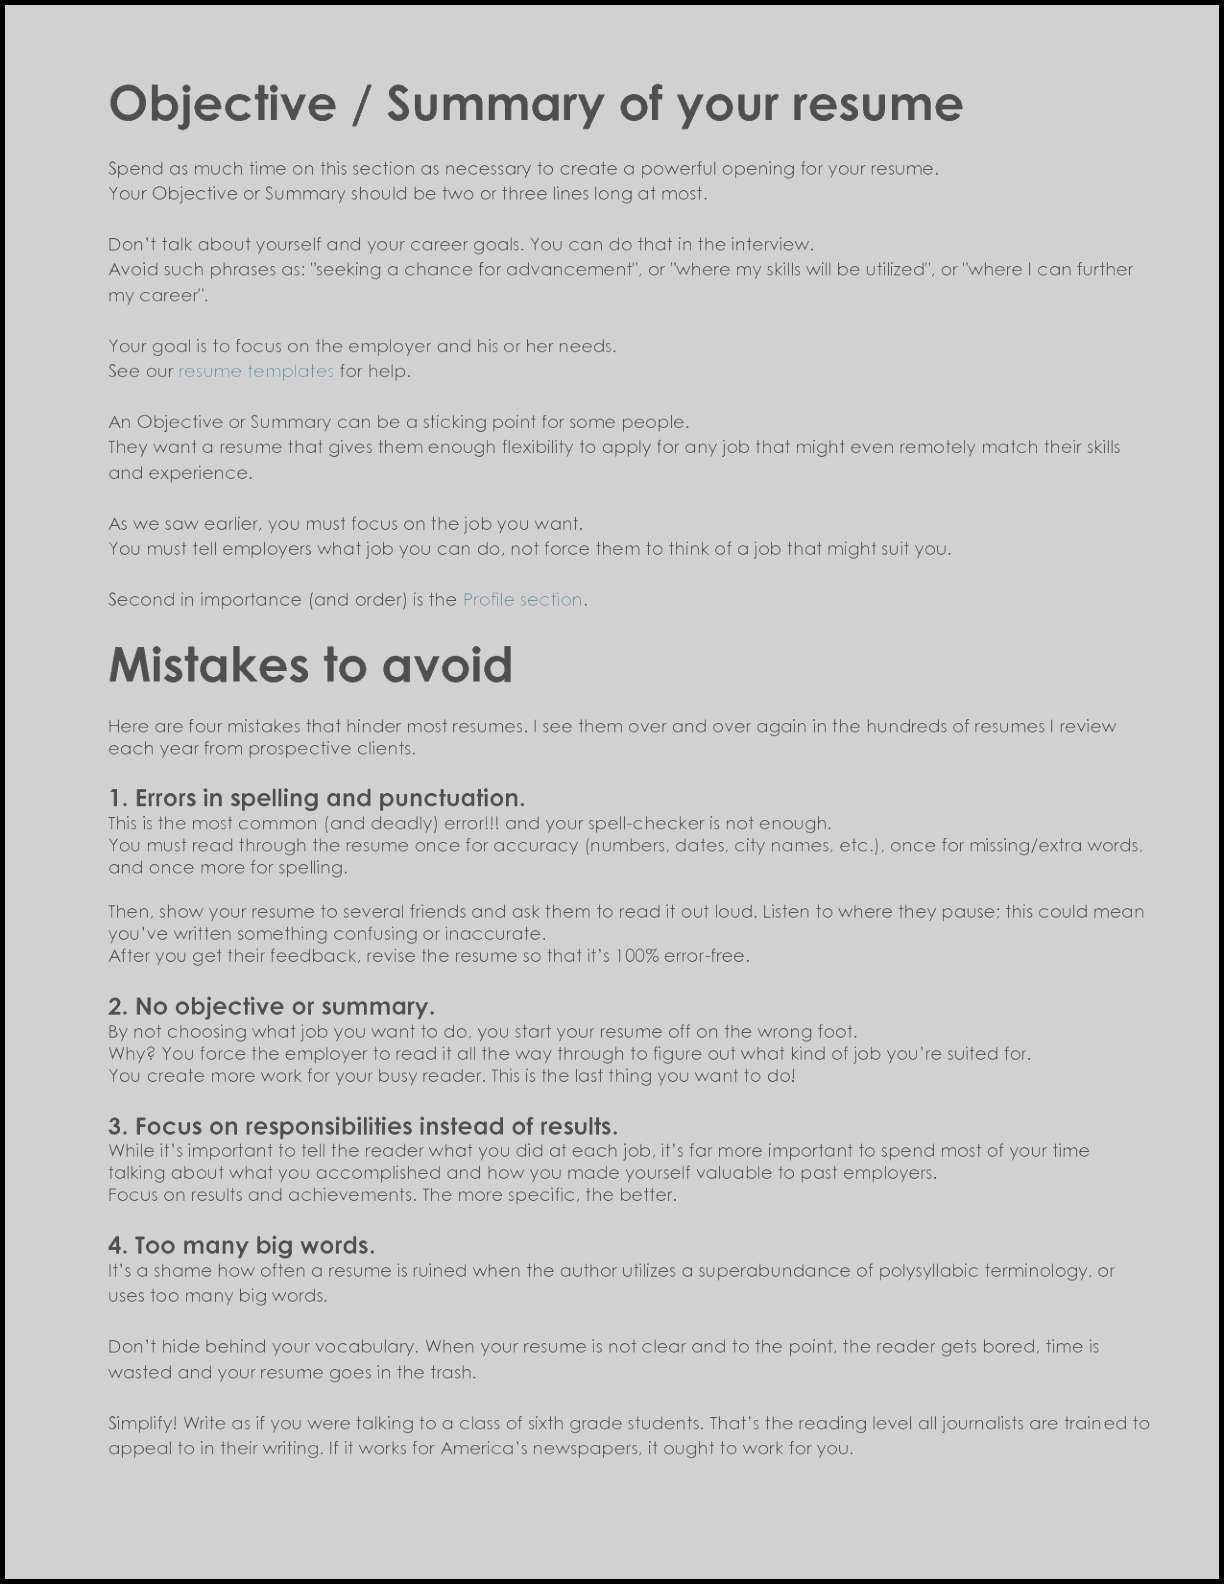 How To Spell Resume Create A Job Resume New Resume Templates No Job Experience Of Create A Job Resume how to spell resume|wikiresume.com